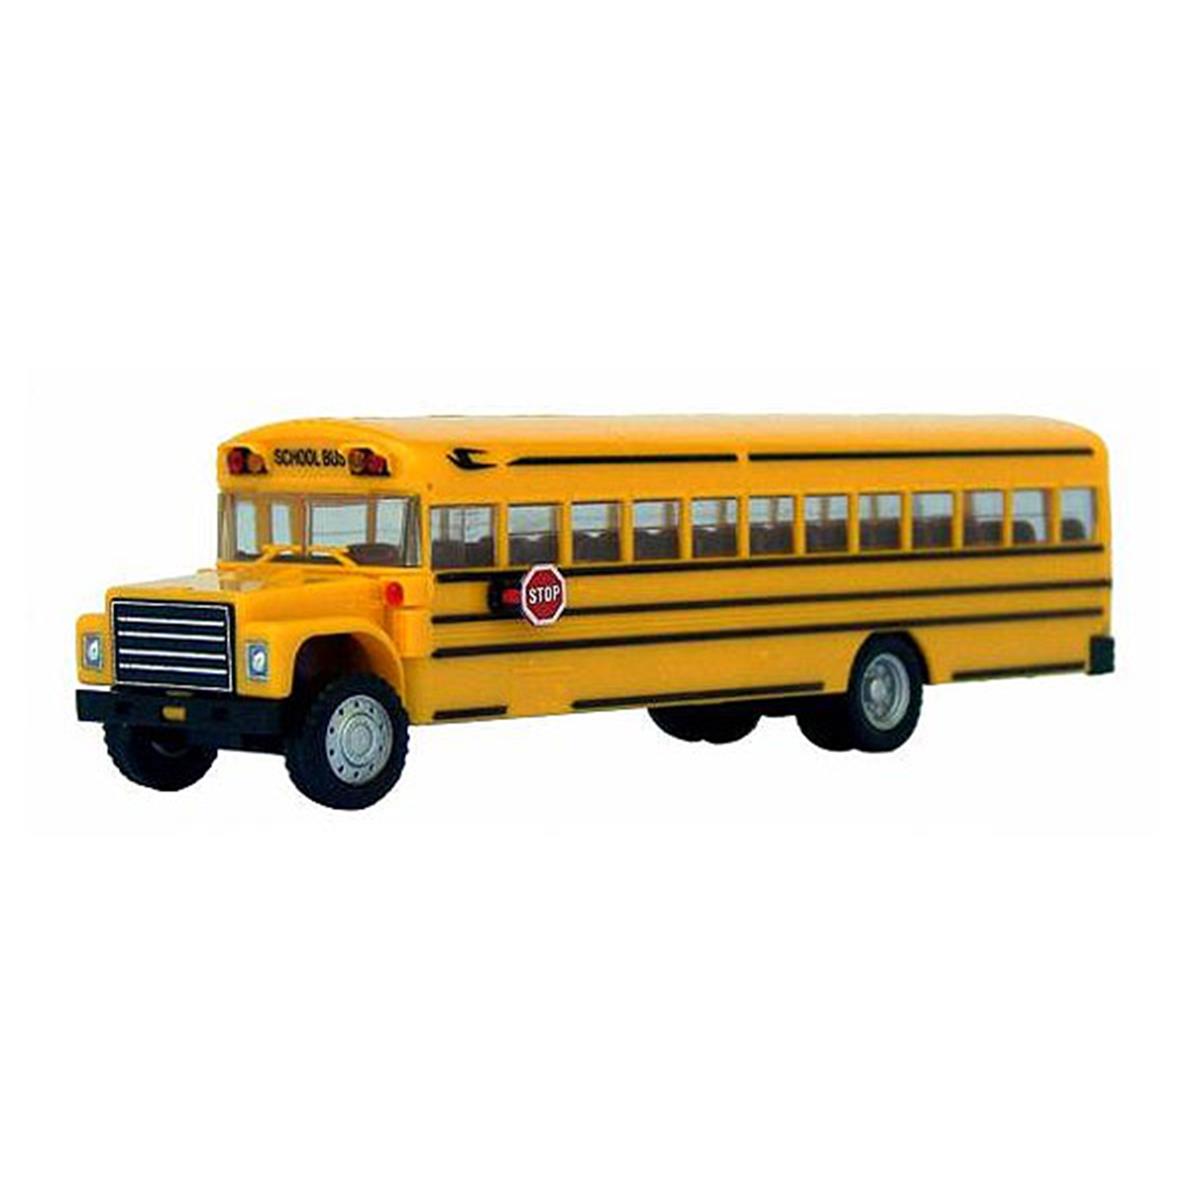 B2breplicas Pro006100 All Or Mostly Plastic School Bus, Yellow